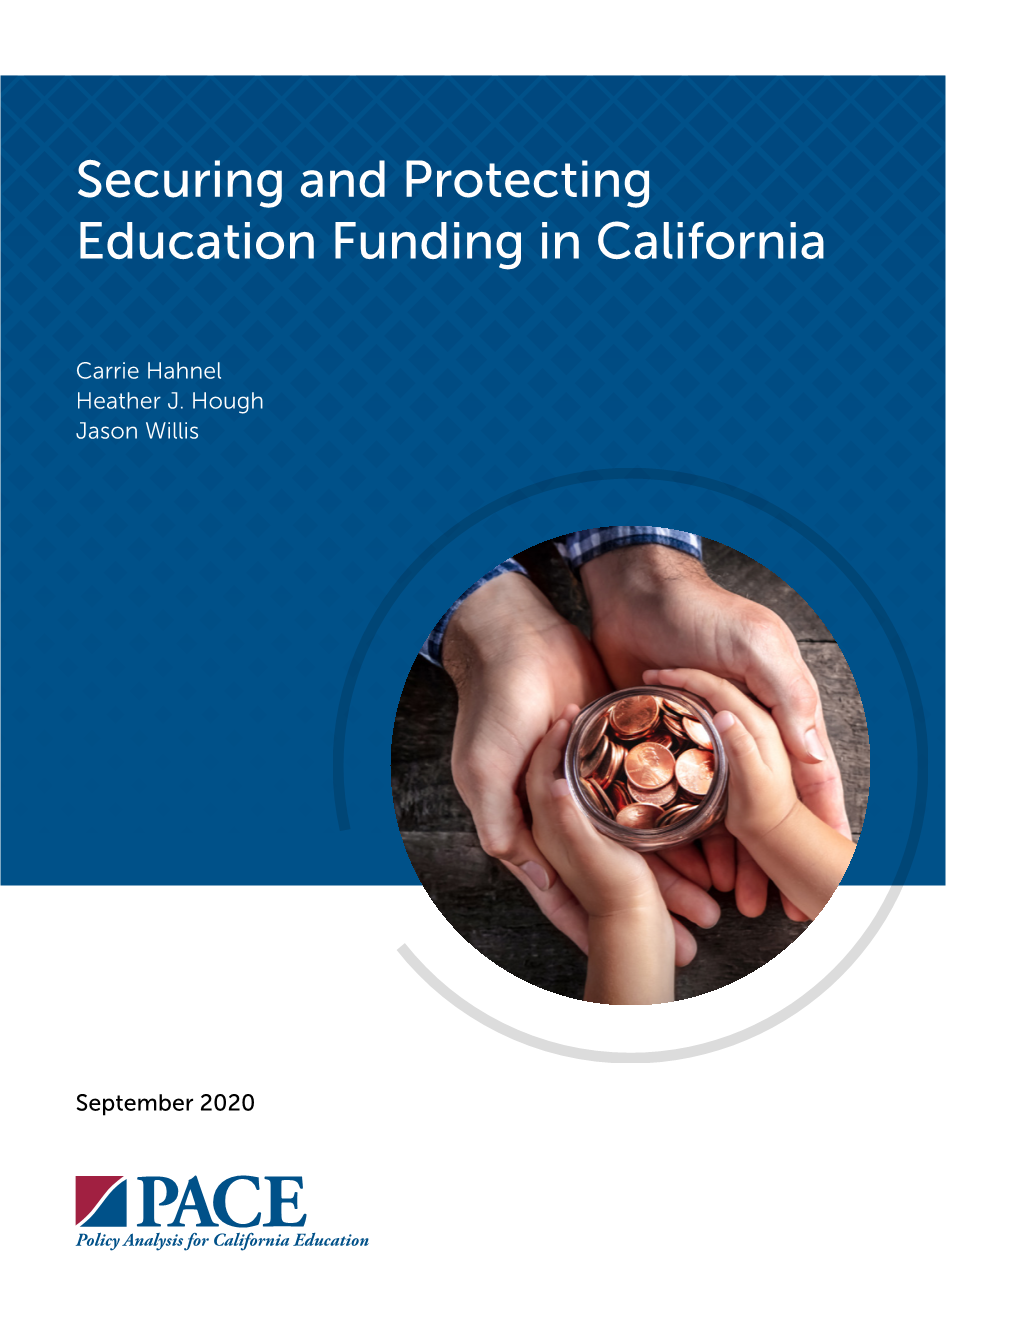 Securing and Protecting Education Funding in California